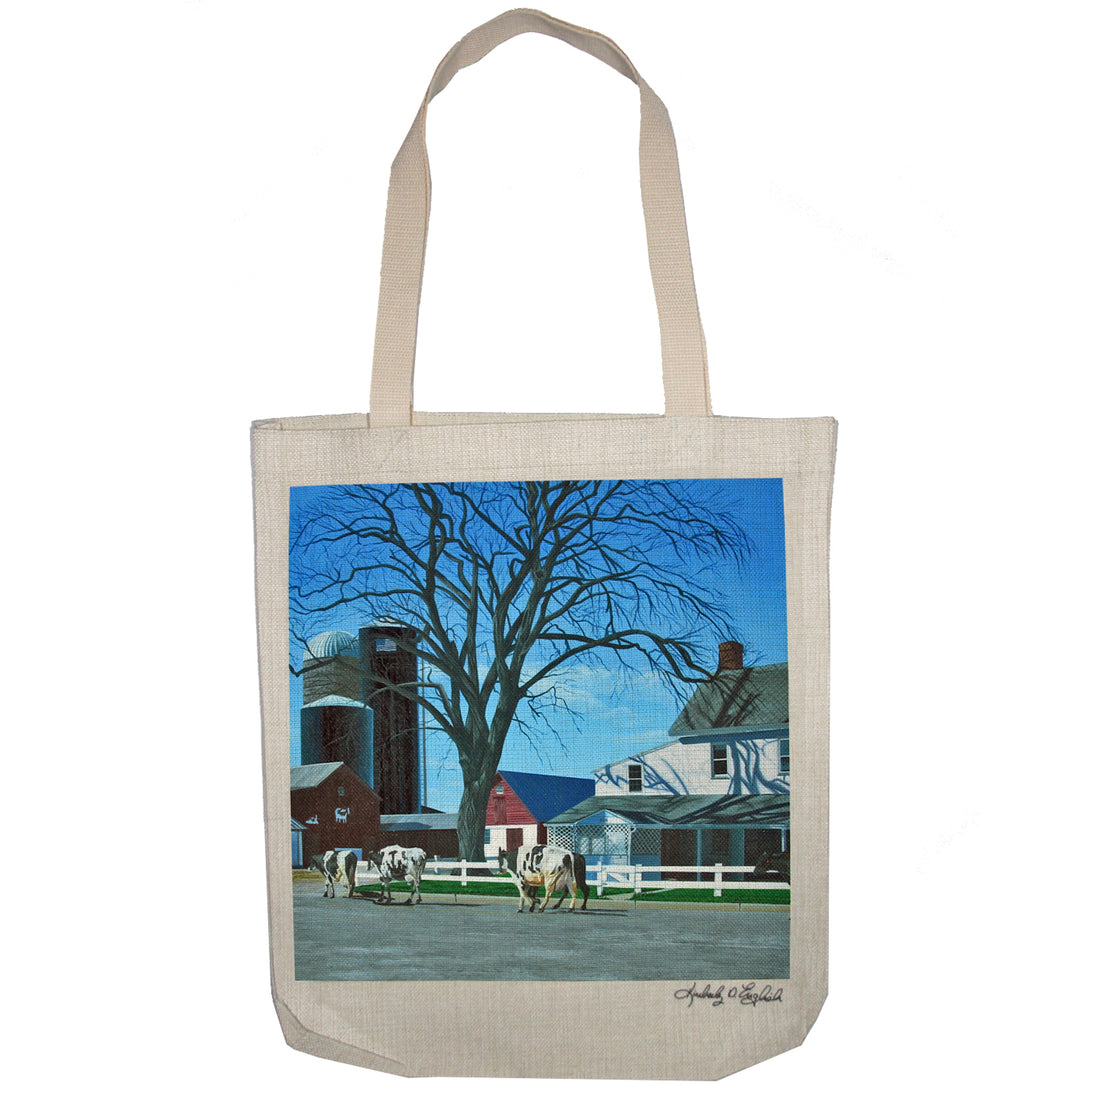 Caught in a Country Moment Tote Bag